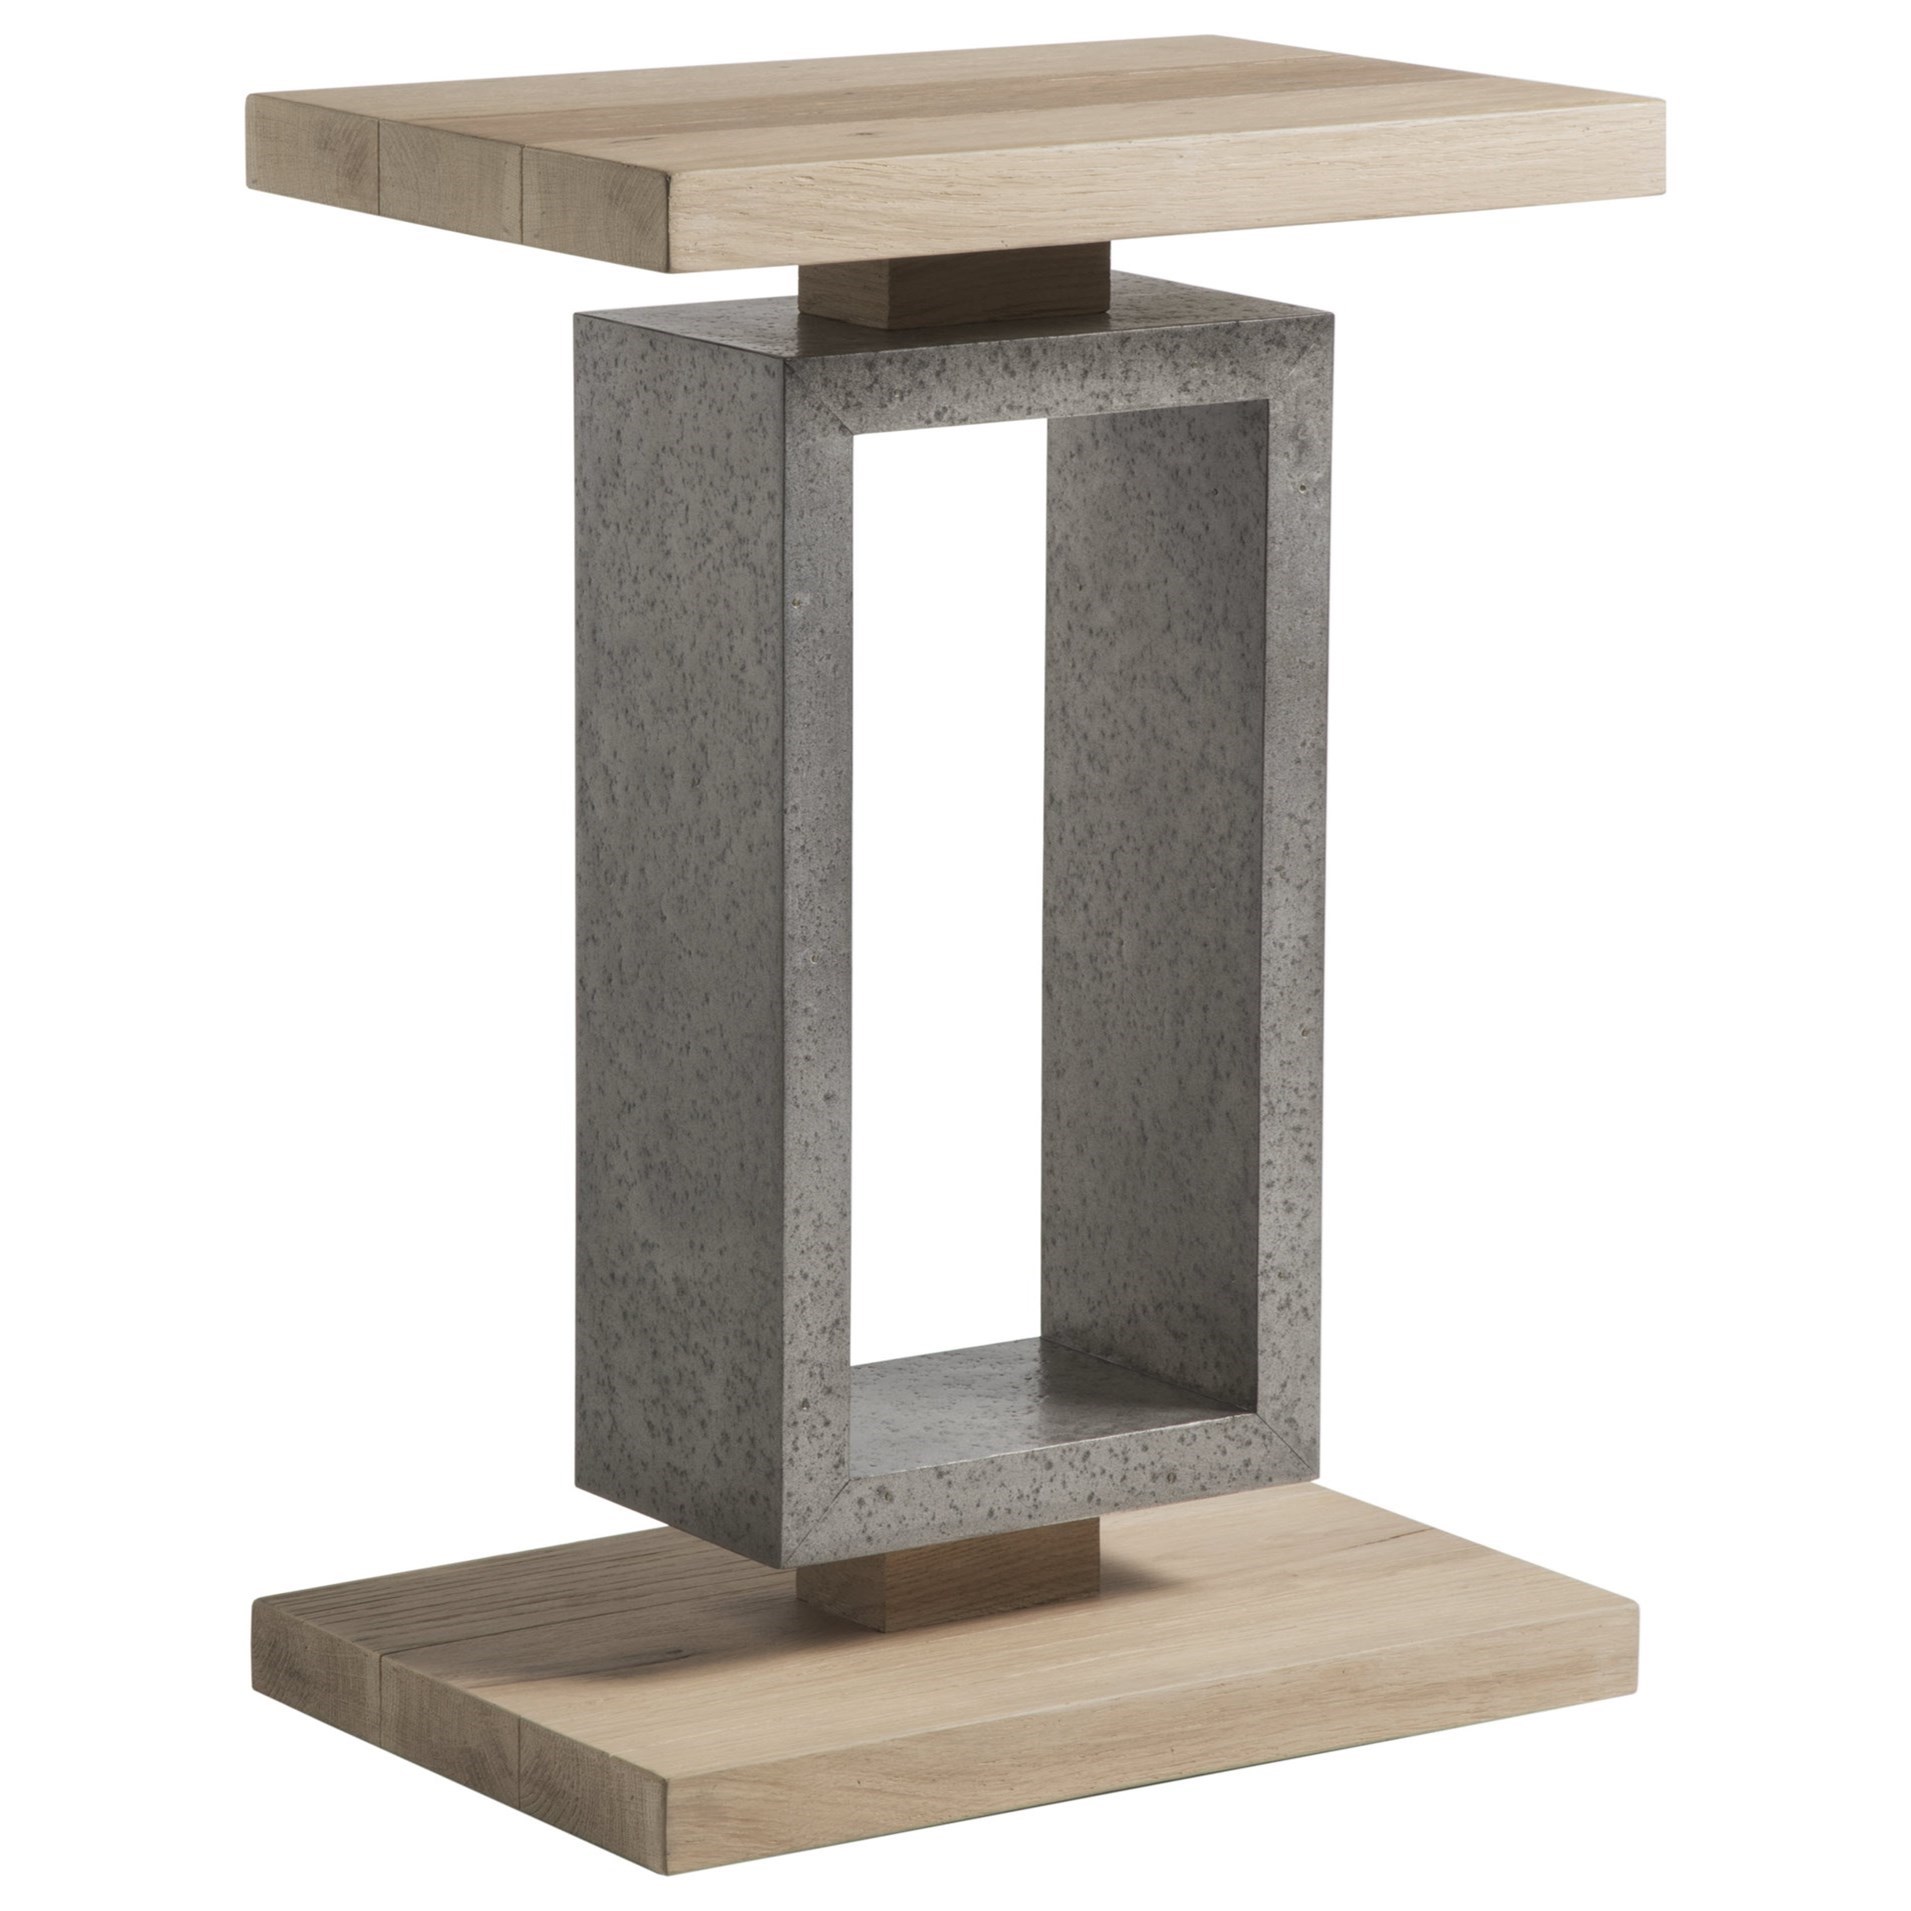 Modern Rustic Rectangular Wood and Metal Accent Table